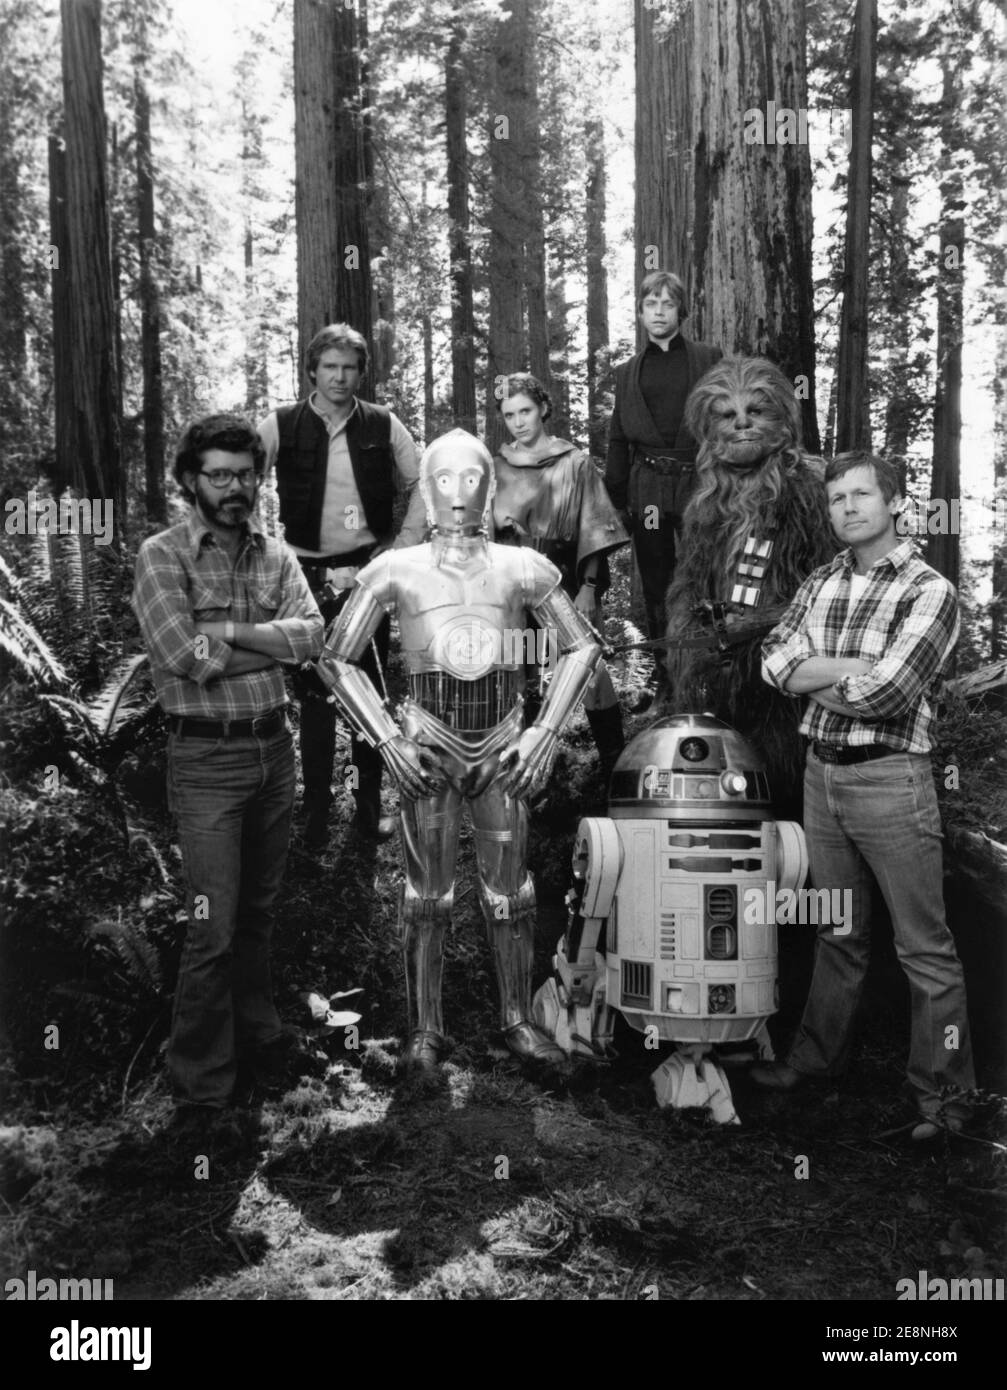 GEORGE LUCAS HARRISON FORD ANTHONY DANIELS CARRIE FISHER MARK HAMILL KENNY BAKER PETER MAYHEW and RICHARD MARQUAND on set location group portrait by Ralph Nelson Jr. during filming of STAR WARS : EPISODE VI - RETURN OF THE JEDI 1983 director RICHARD MARQUAND story George Lucas screenplay Lawrence Kasdan and George Lucas music John Williams executive producer George Lucas Lucasfilm / Twentieth Century Fox Stock Photo